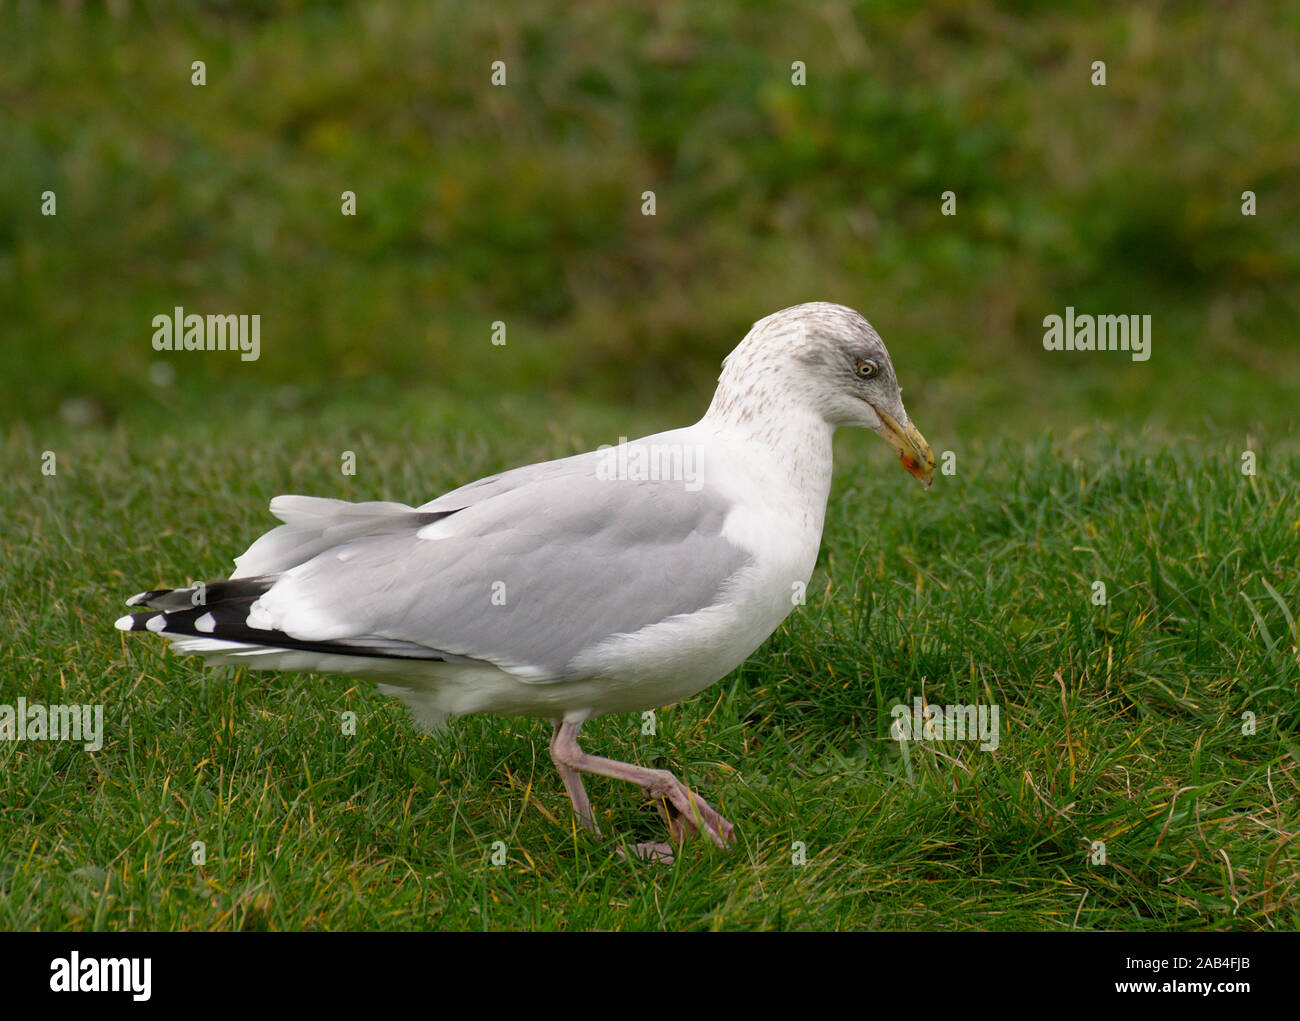 Seagull bird doing the rain dance on grass to entice worms to the surface for food Stock Photo